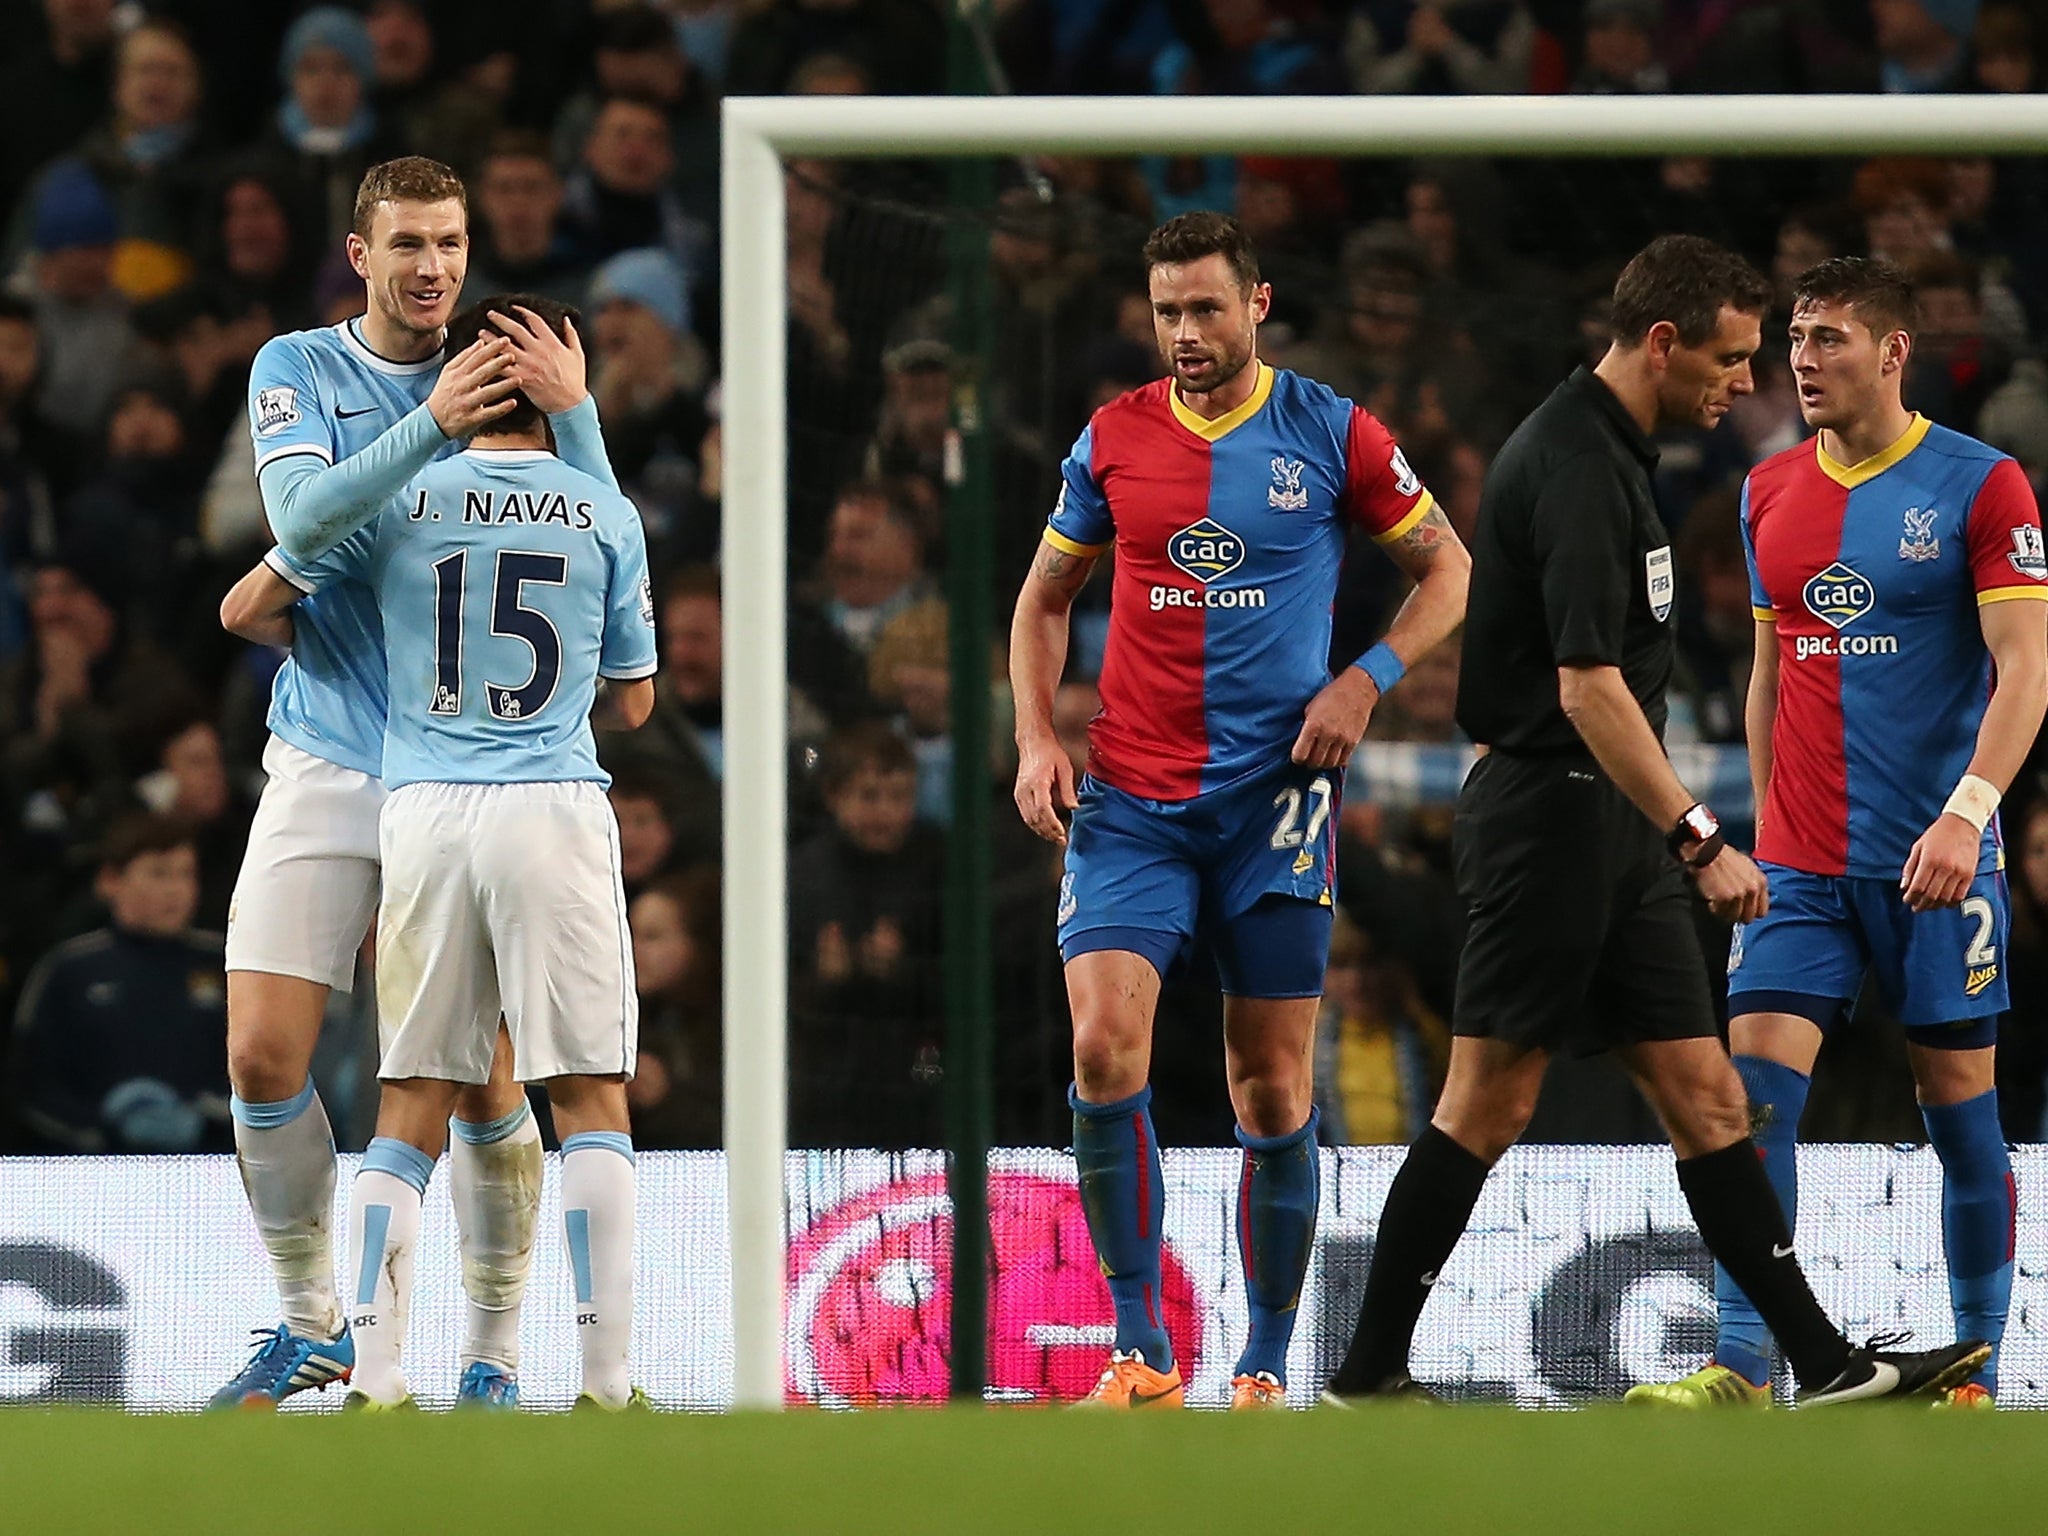 Edin Dzeko and Jesus Navas celebrate after the former scored the winning goal for Manchester City against Crystal Palace